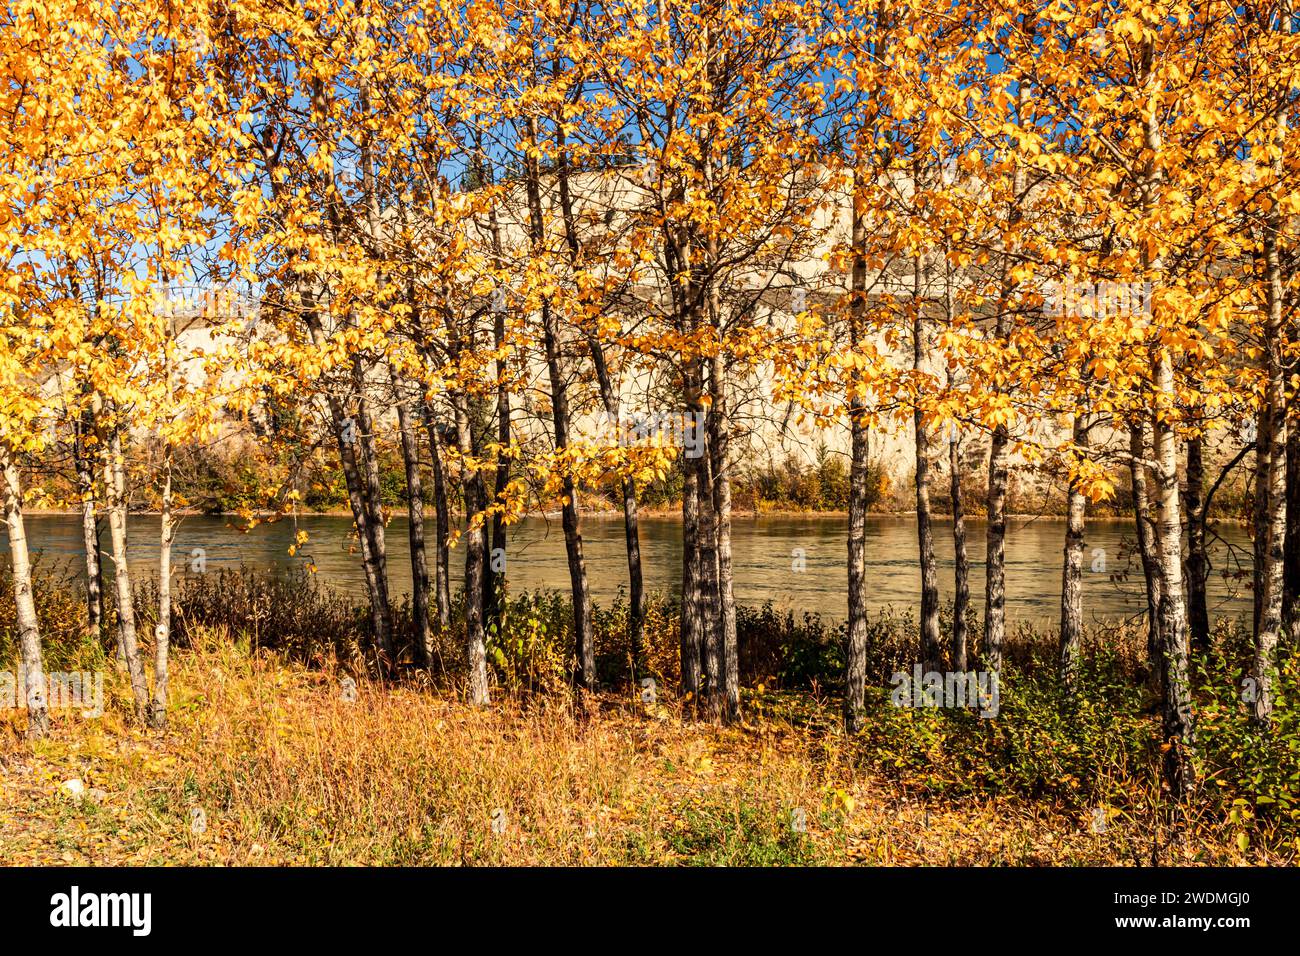 Looking across the Yukon River through Aspen trees in fall.  Taken from a park on the Whitehorse side of the river. Stock Photo